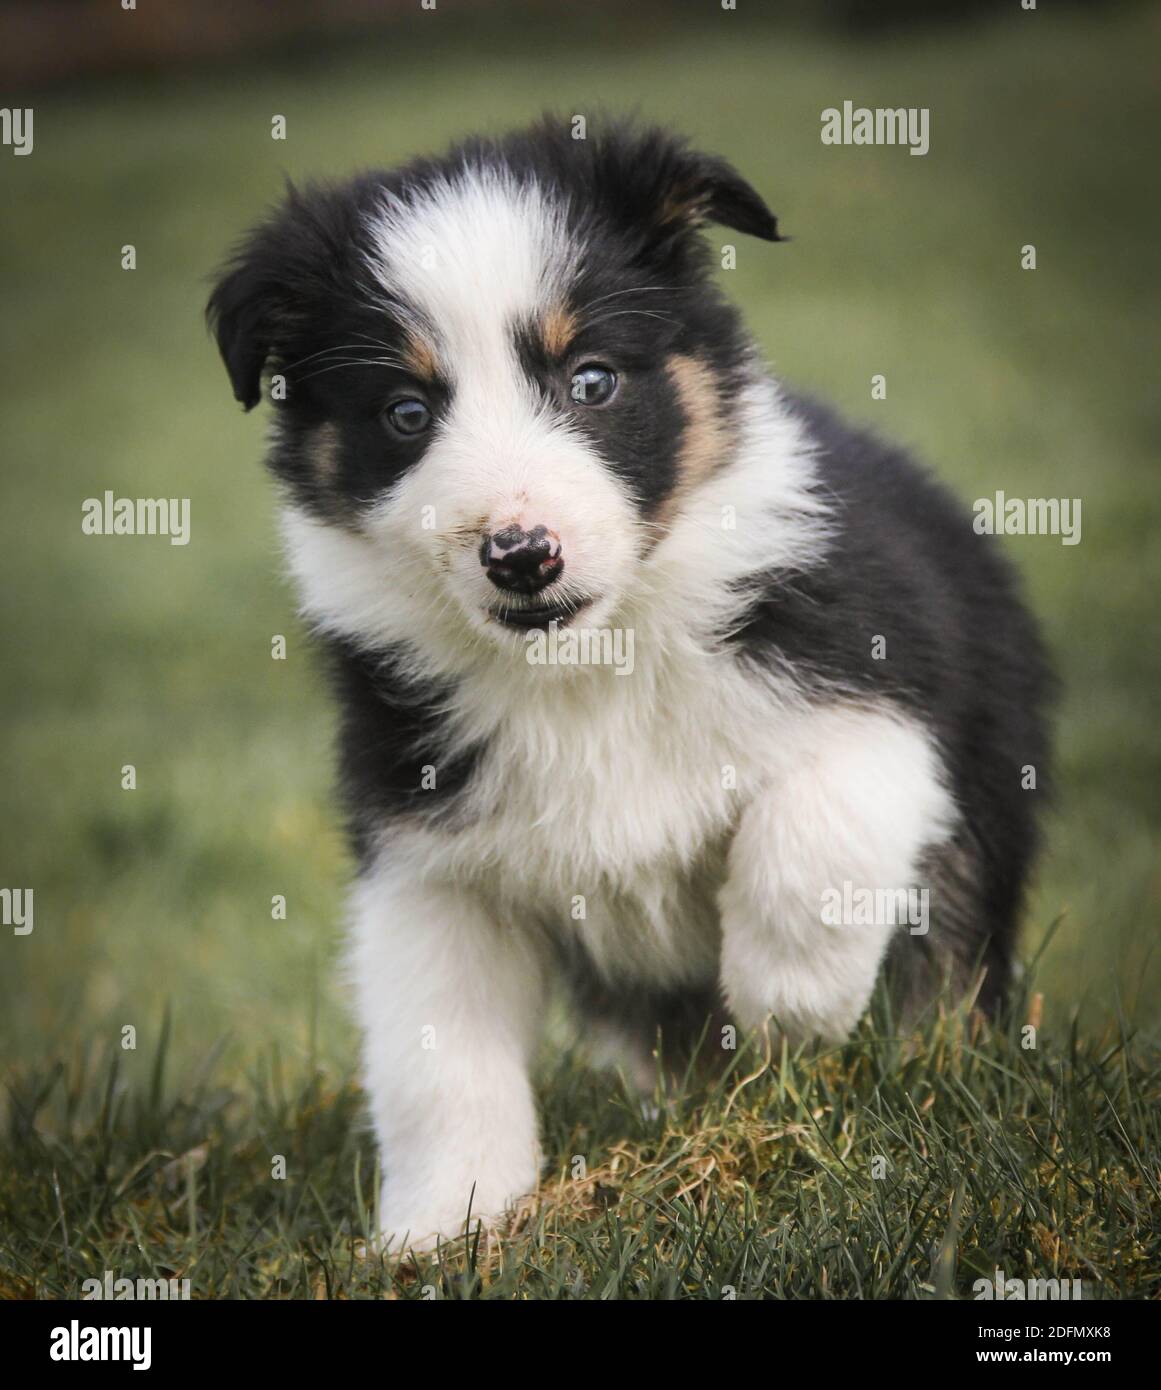 Curious young border collie puppy walking towards camera Stock Photo